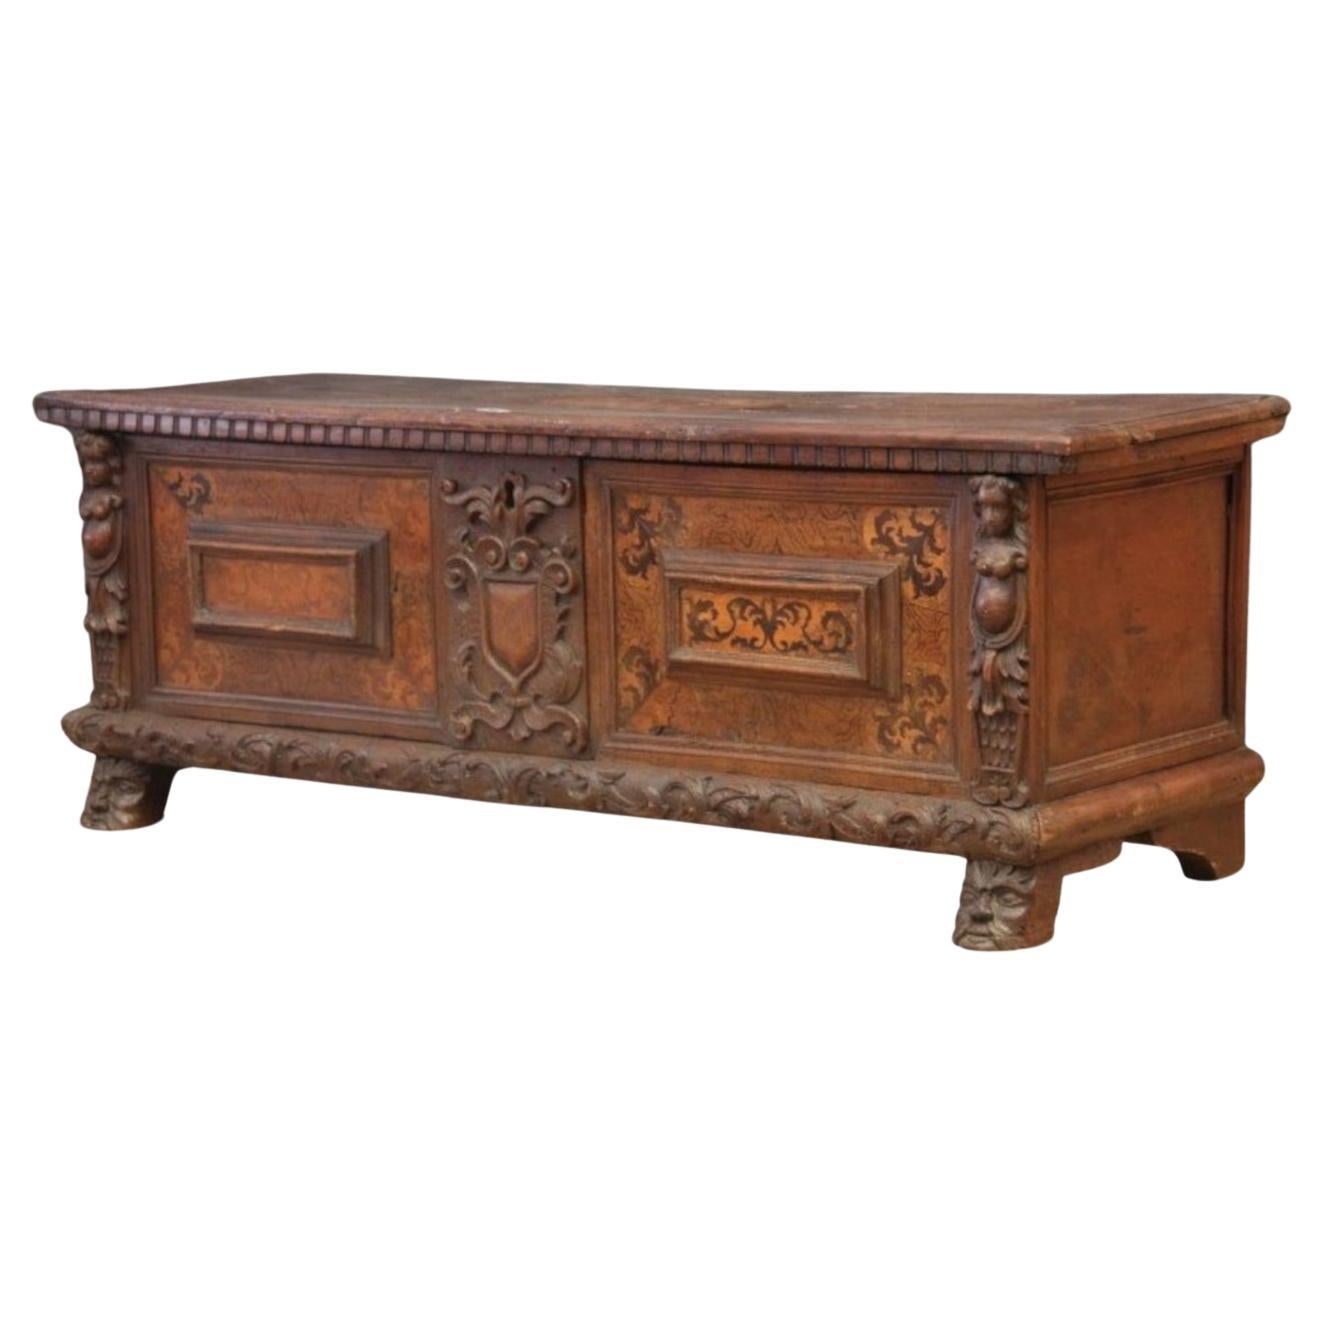 Walnut chest with maple inlays and carved friezes, from the 1600s.